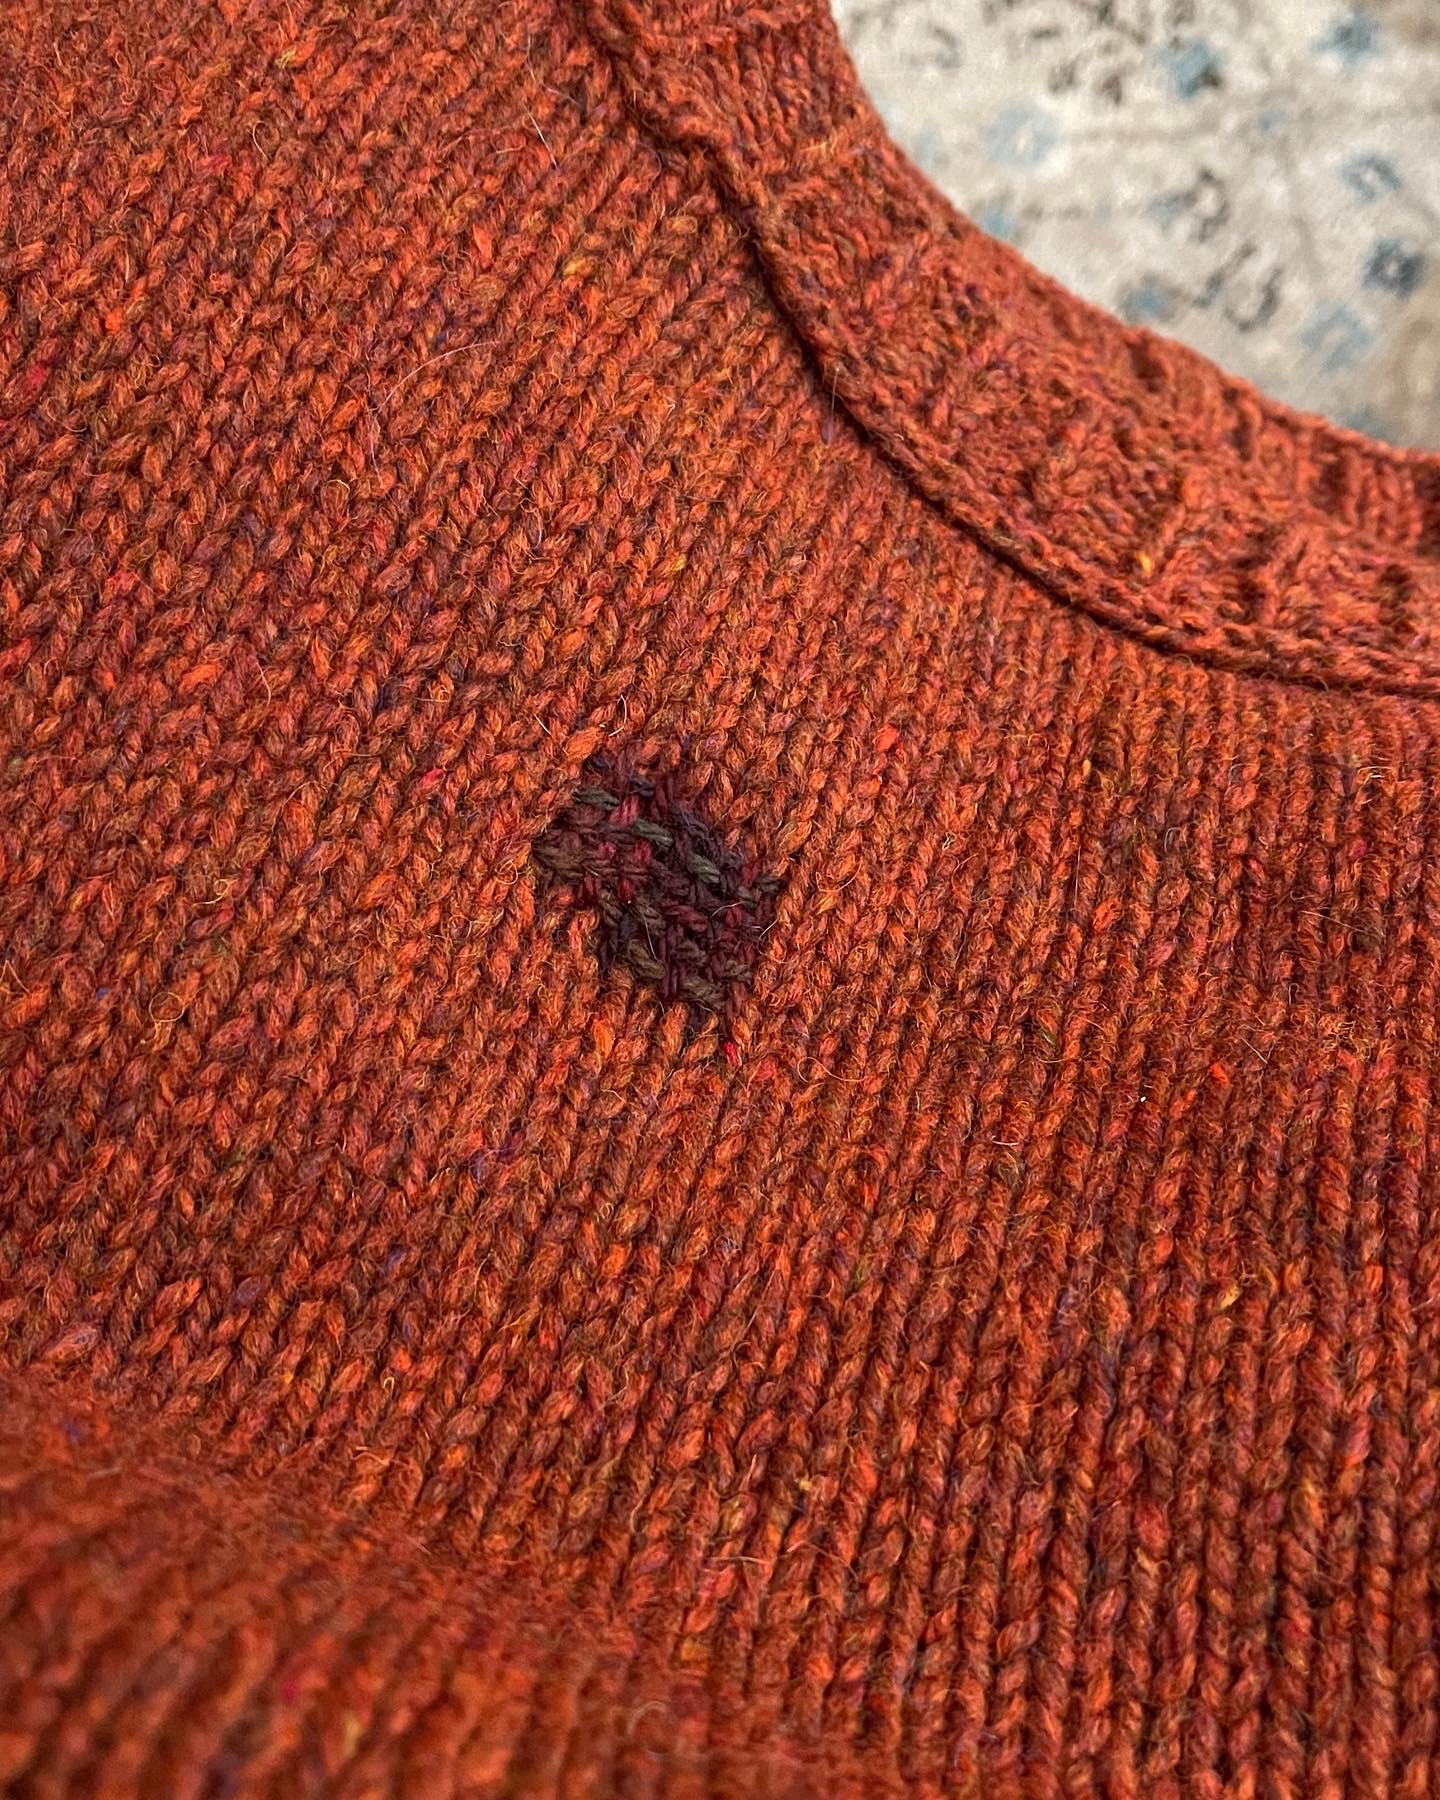 Visible mending on a sweater using dark yarn